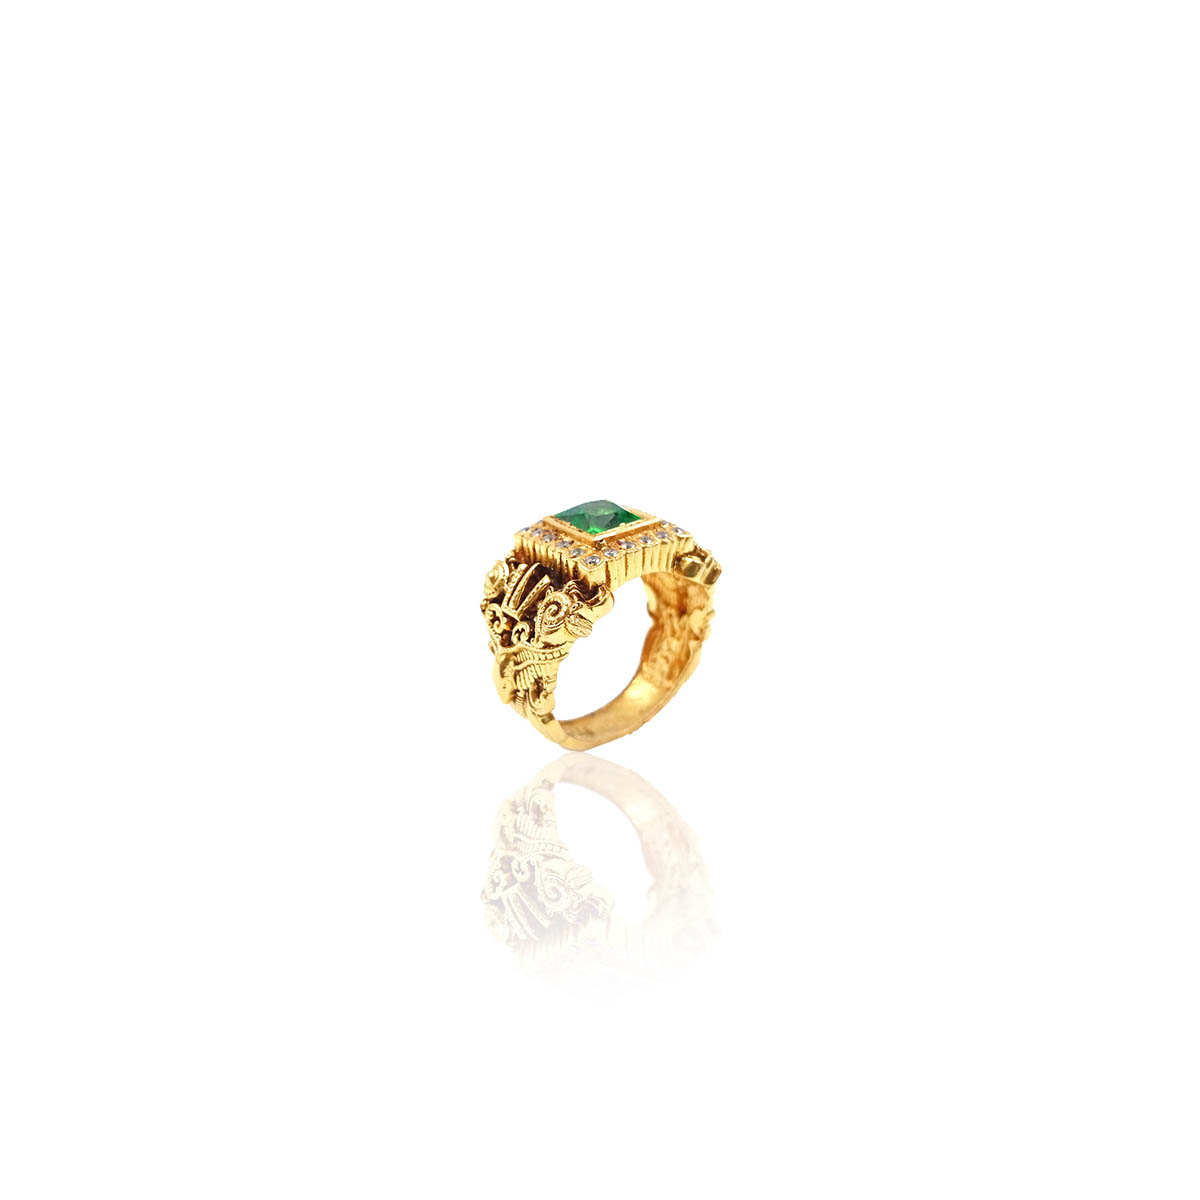 8mm Custom Made, Solid Yellow Gold Ring with Mayan Inspired Symbols –  MagicHands Jewelry